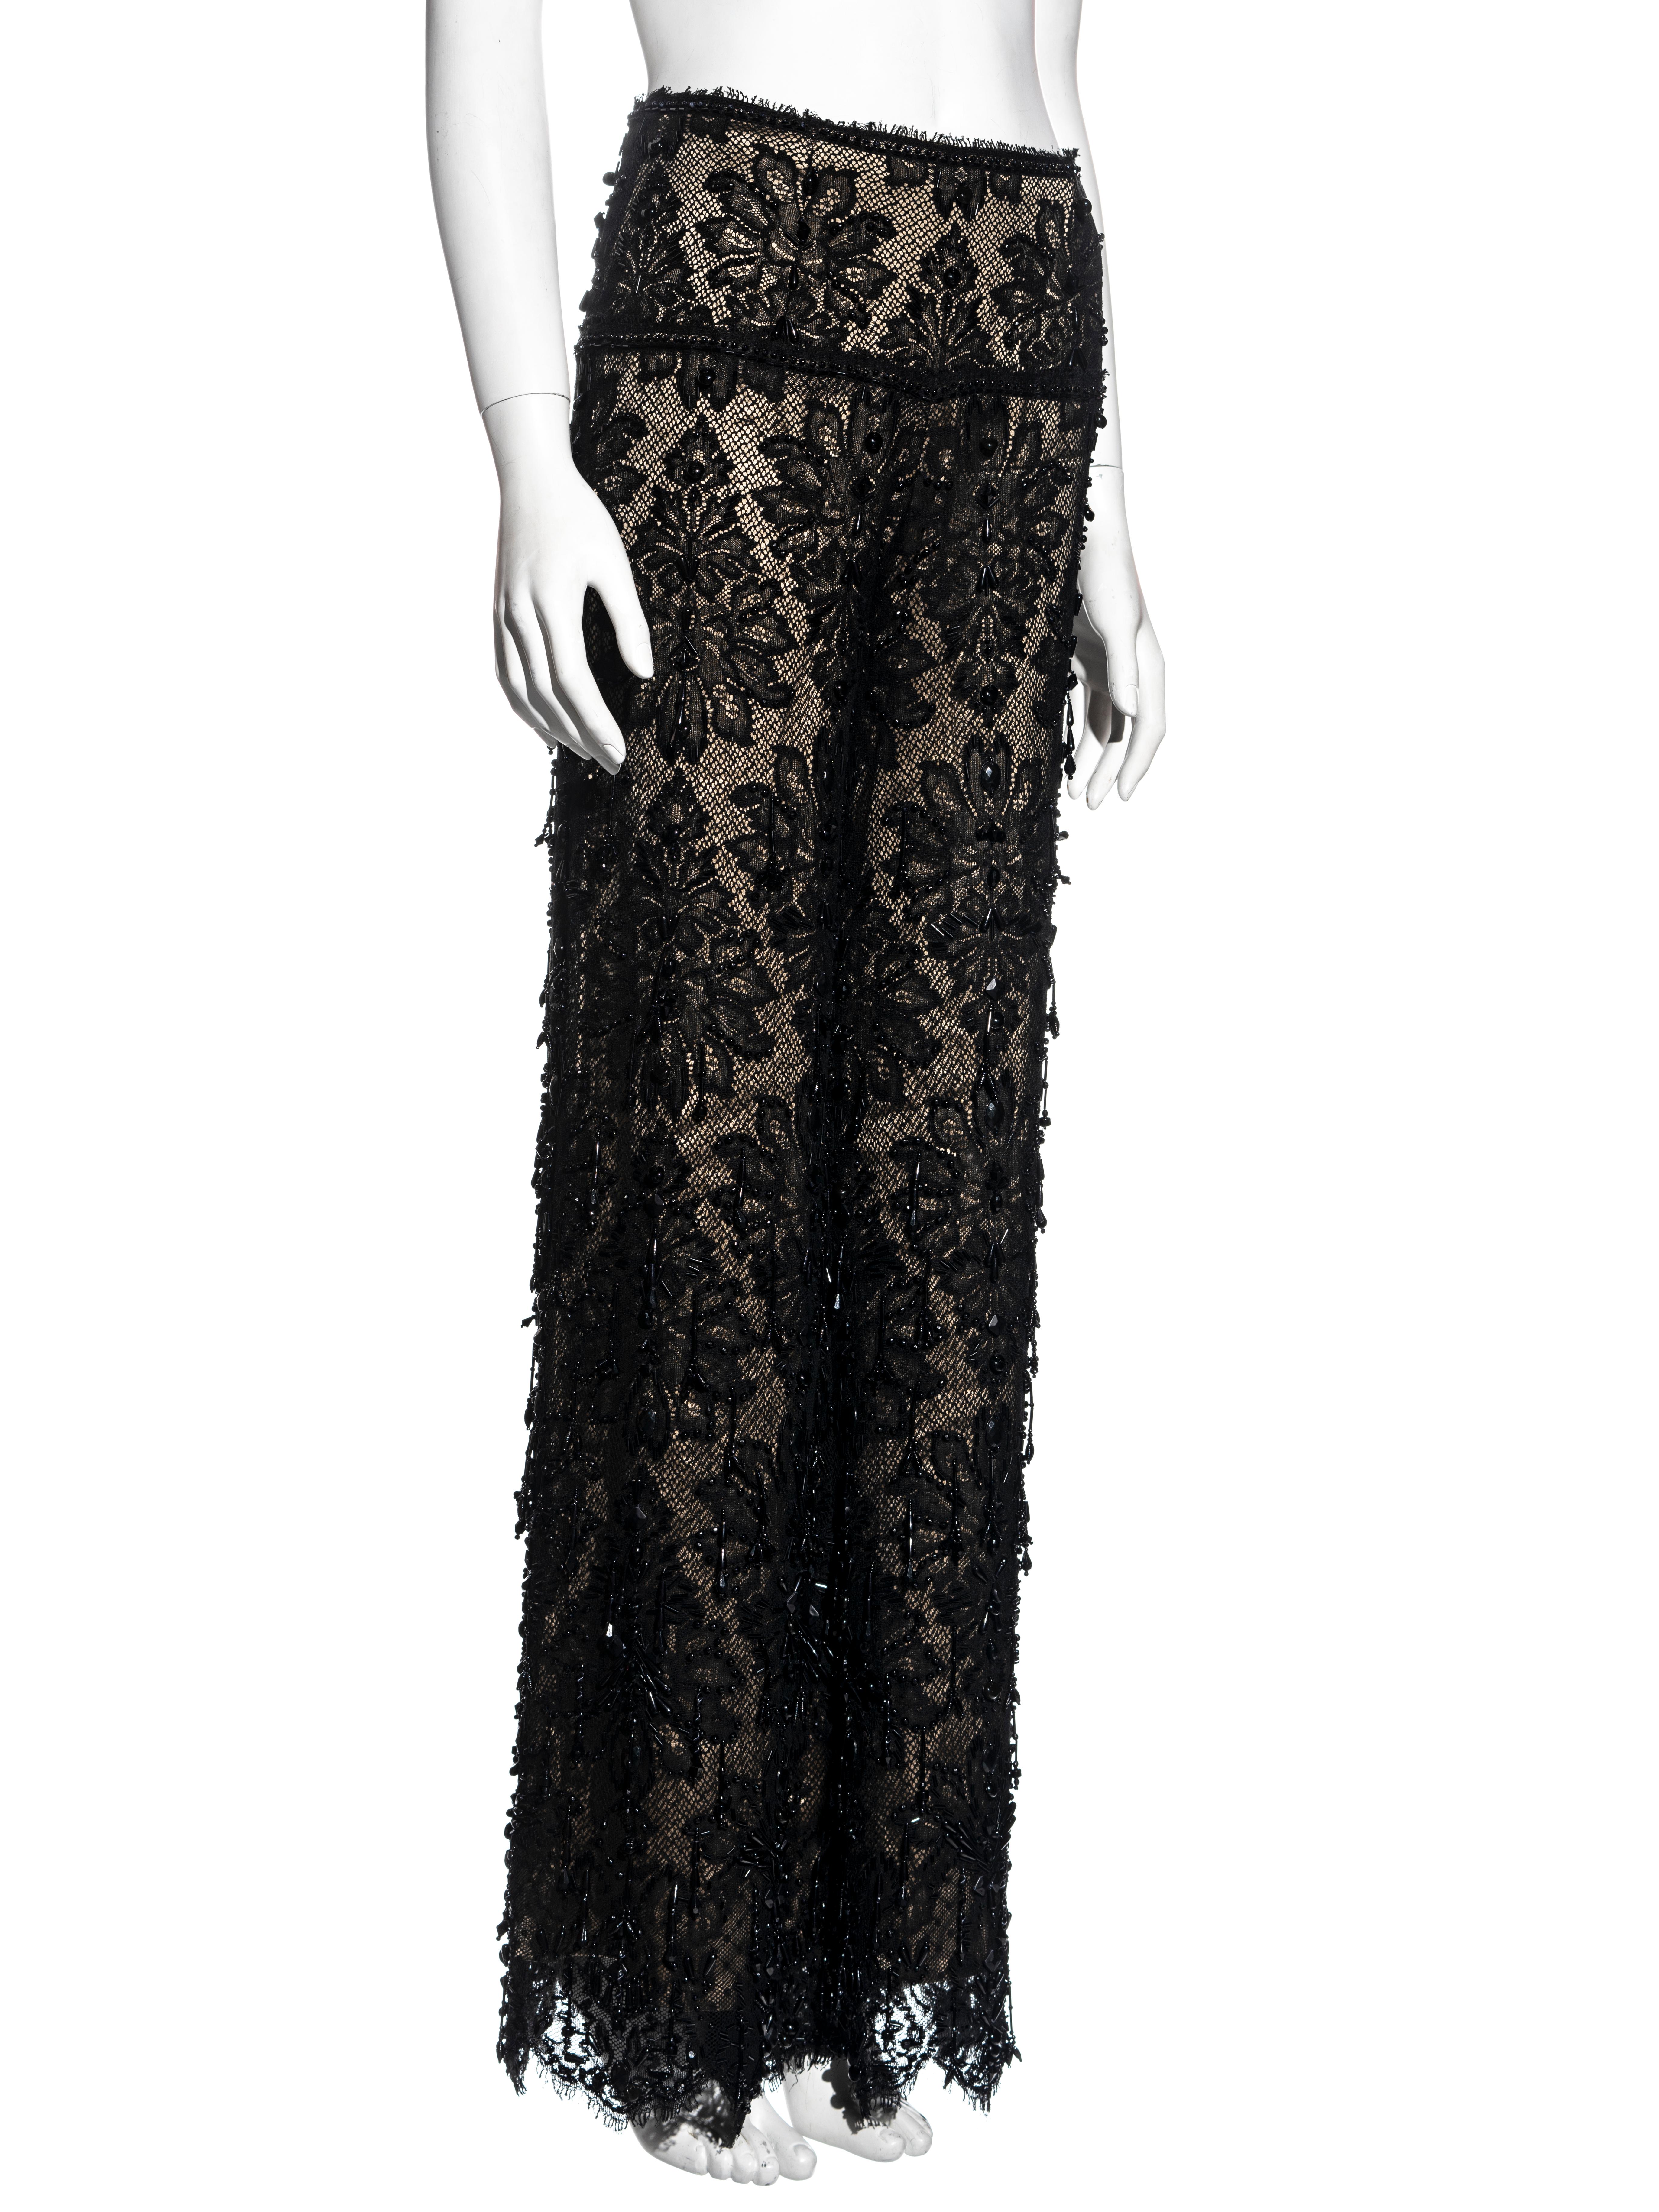 Gianfranco Ferré black beaded lace evening pants, ss 2002 In Excellent Condition For Sale In London, GB